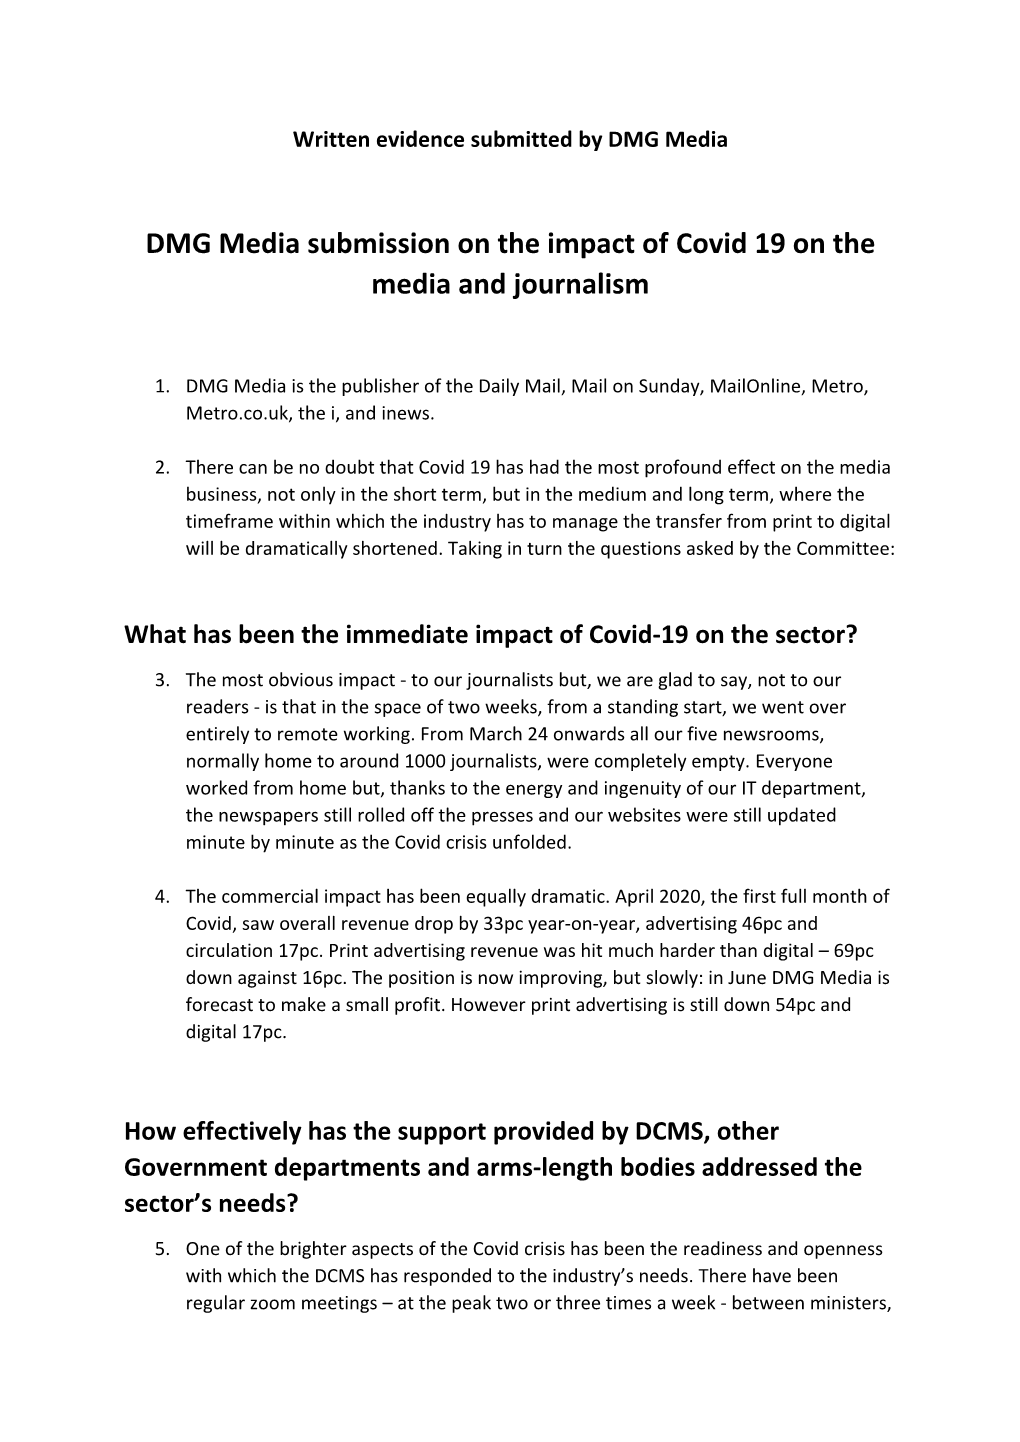 DMG Media Submission on the Impact of Covid 19 on the Media and Journalism